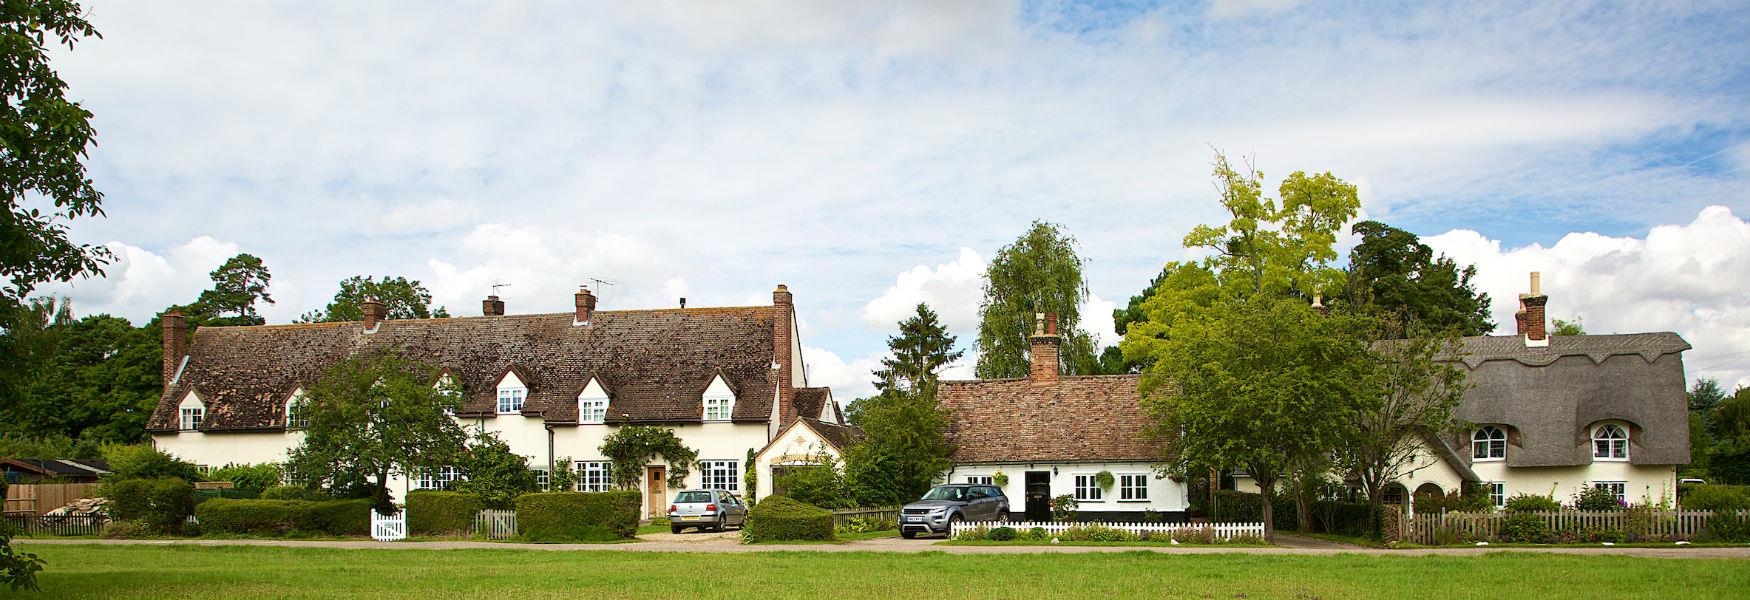 Cottages in Bedfordshire